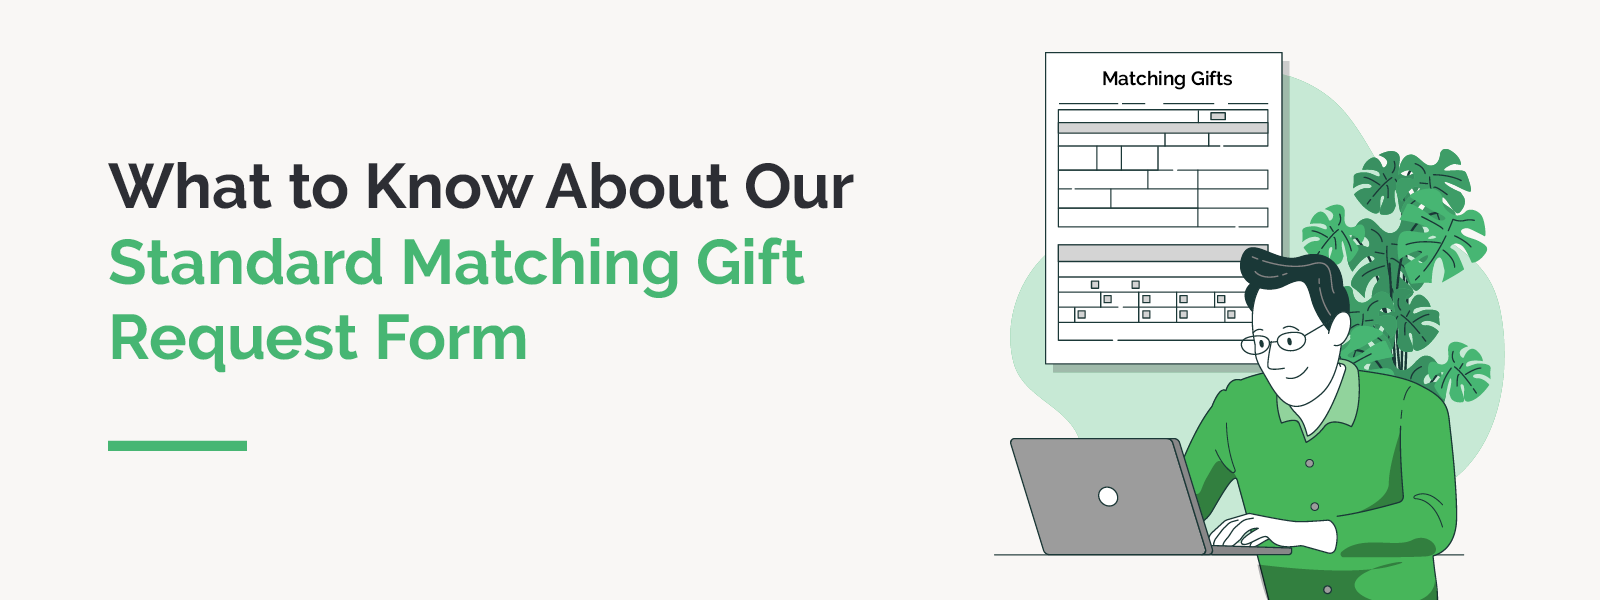 What to Know About Our Standard Matching Gift Request Form